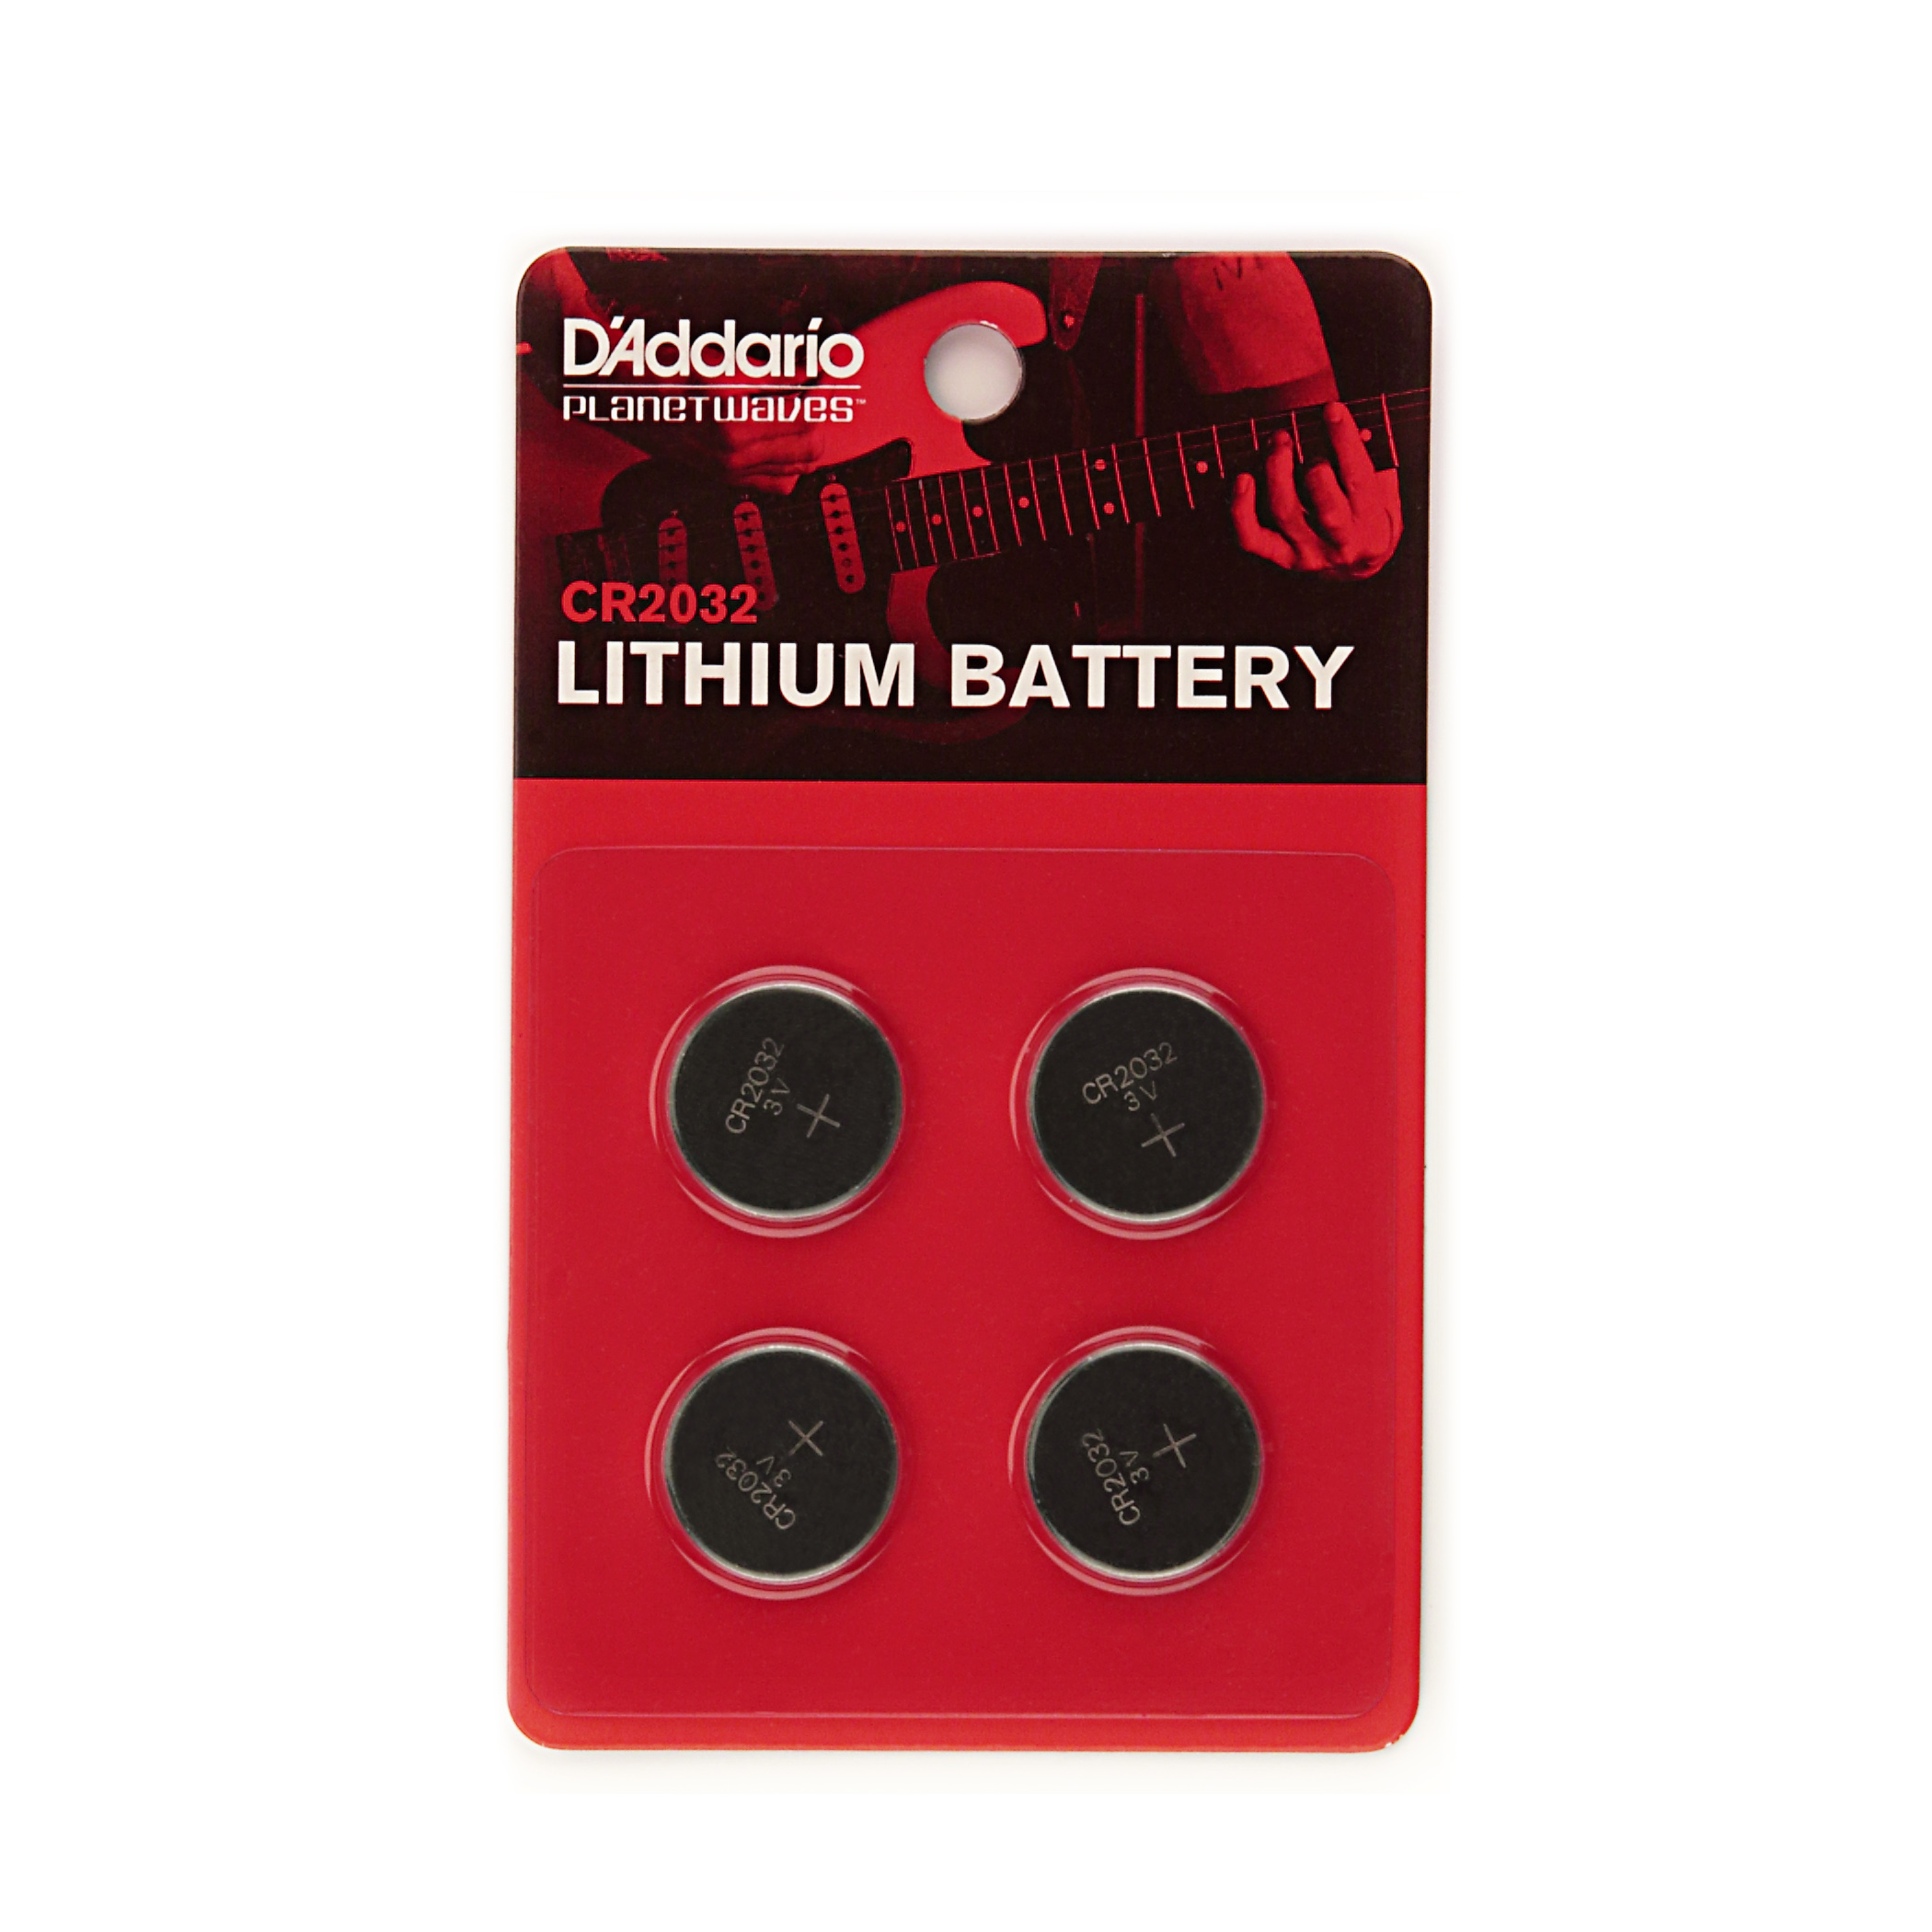 Lithium Battery, 4-pack cr2032